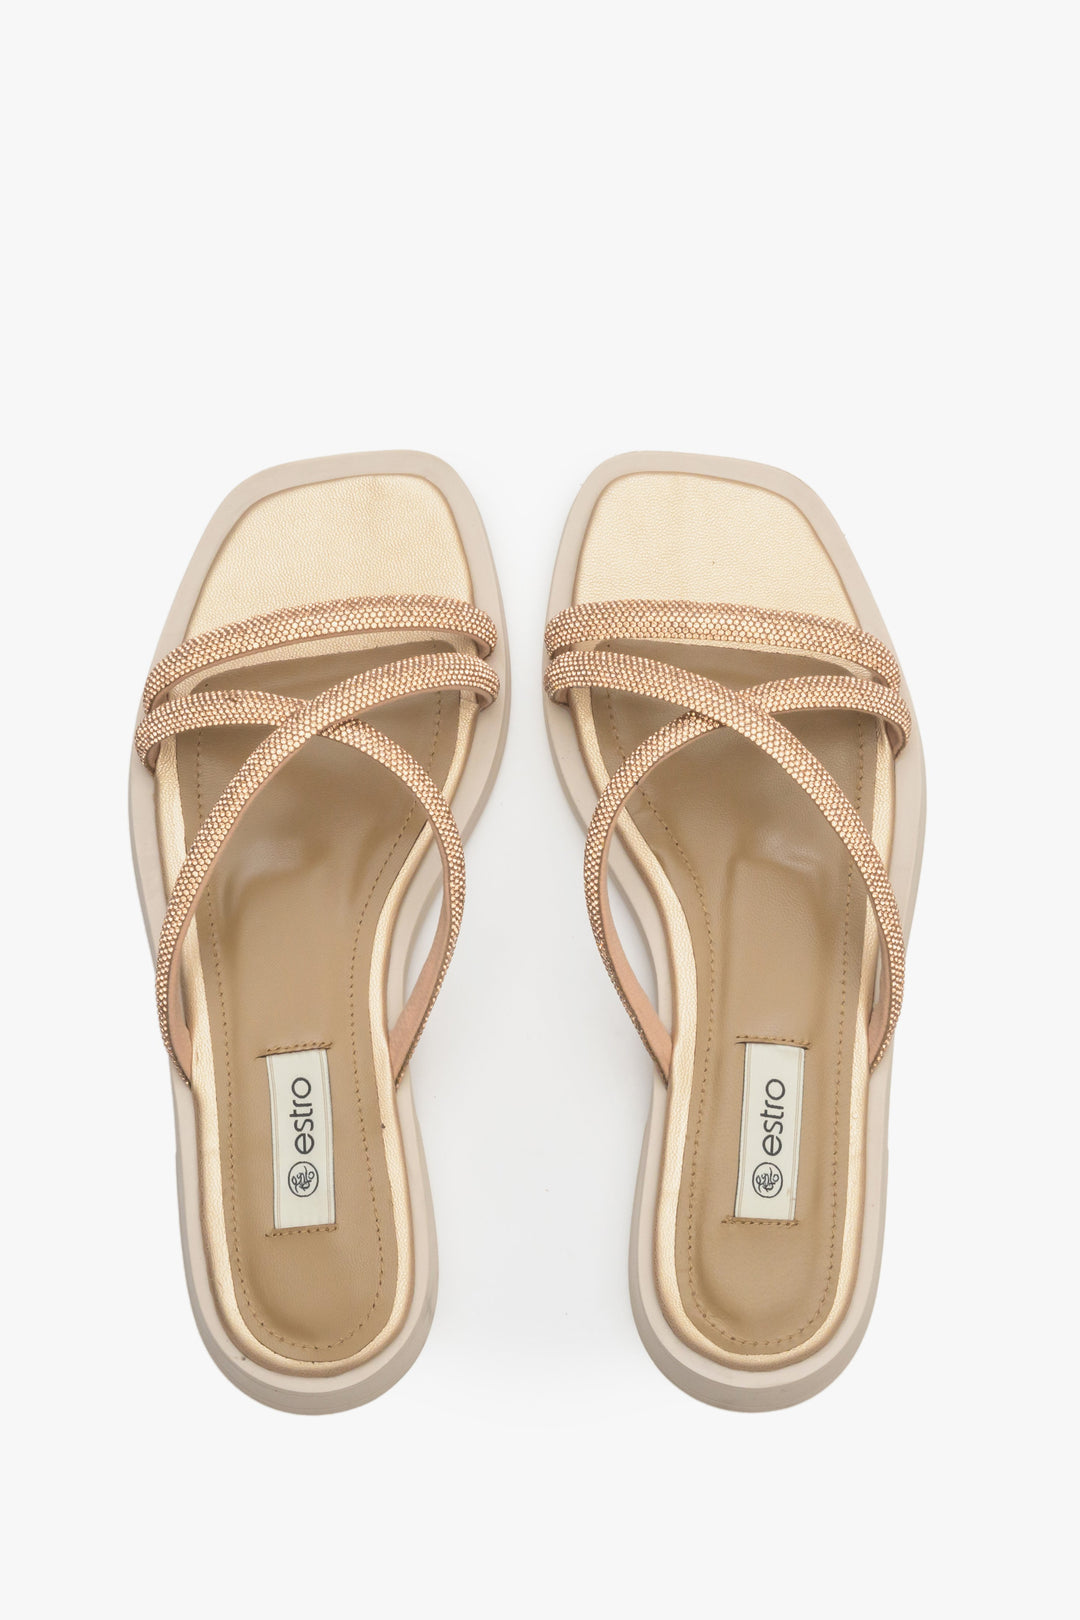 Comfy and stylish women's slide sandals on a flat heel by Estro in gold colour.